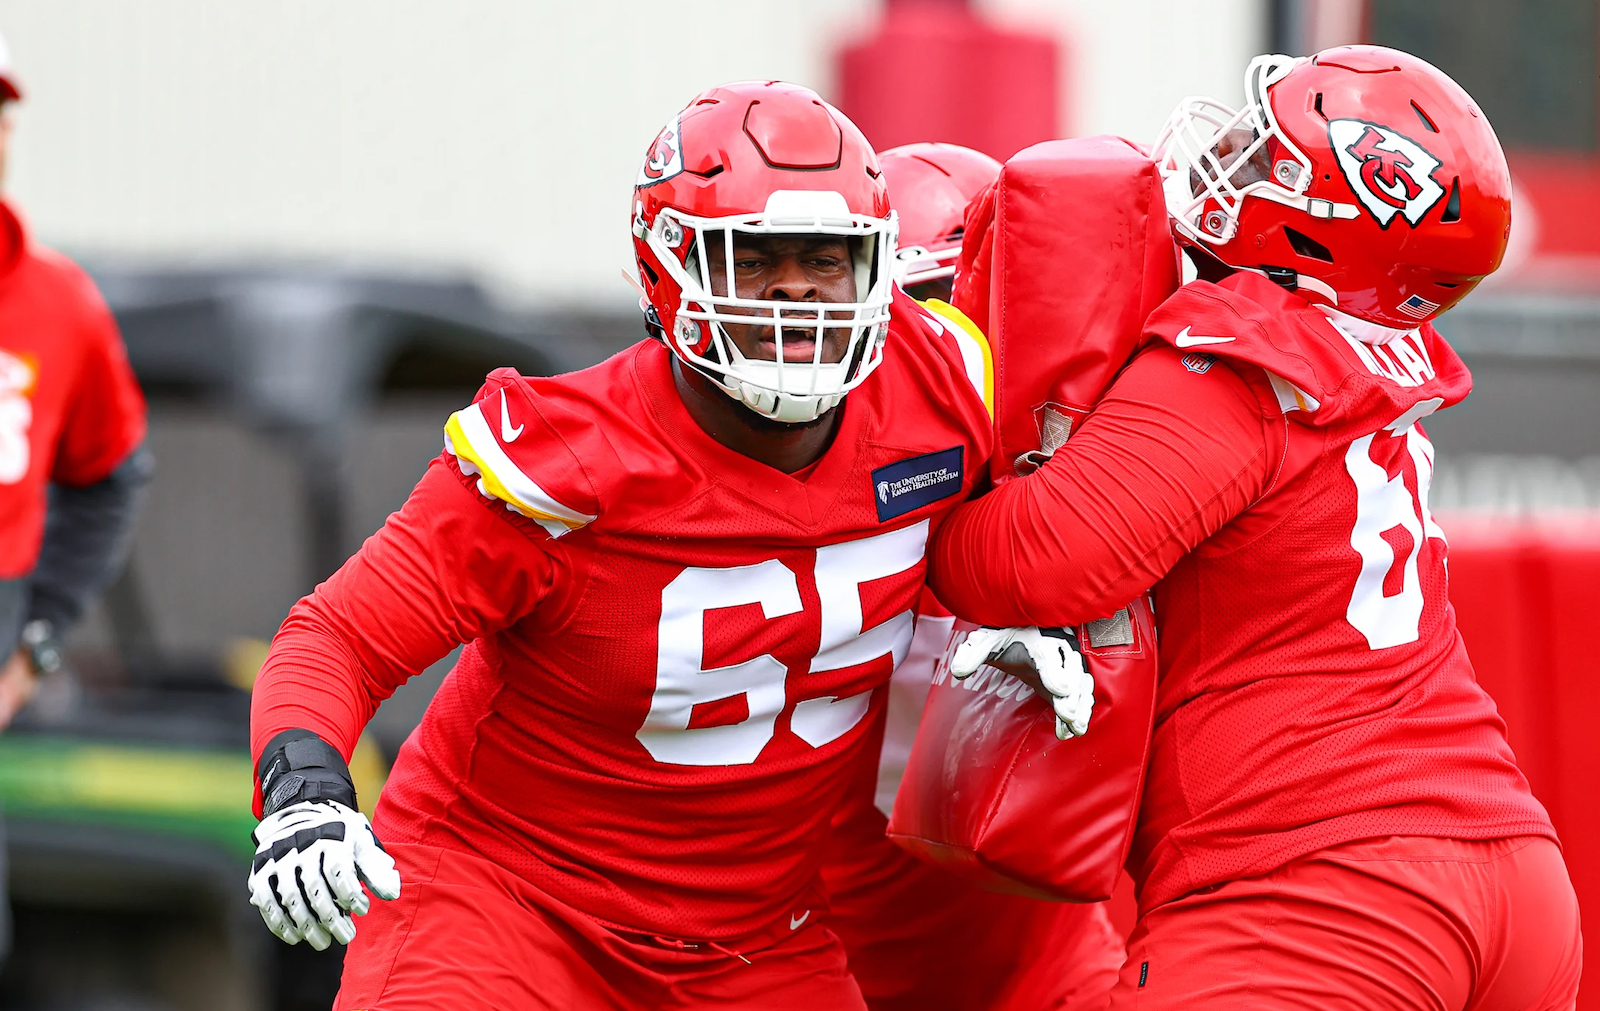 Chiefs Rookie Trey Smith “Has Starting Guard in His Future”